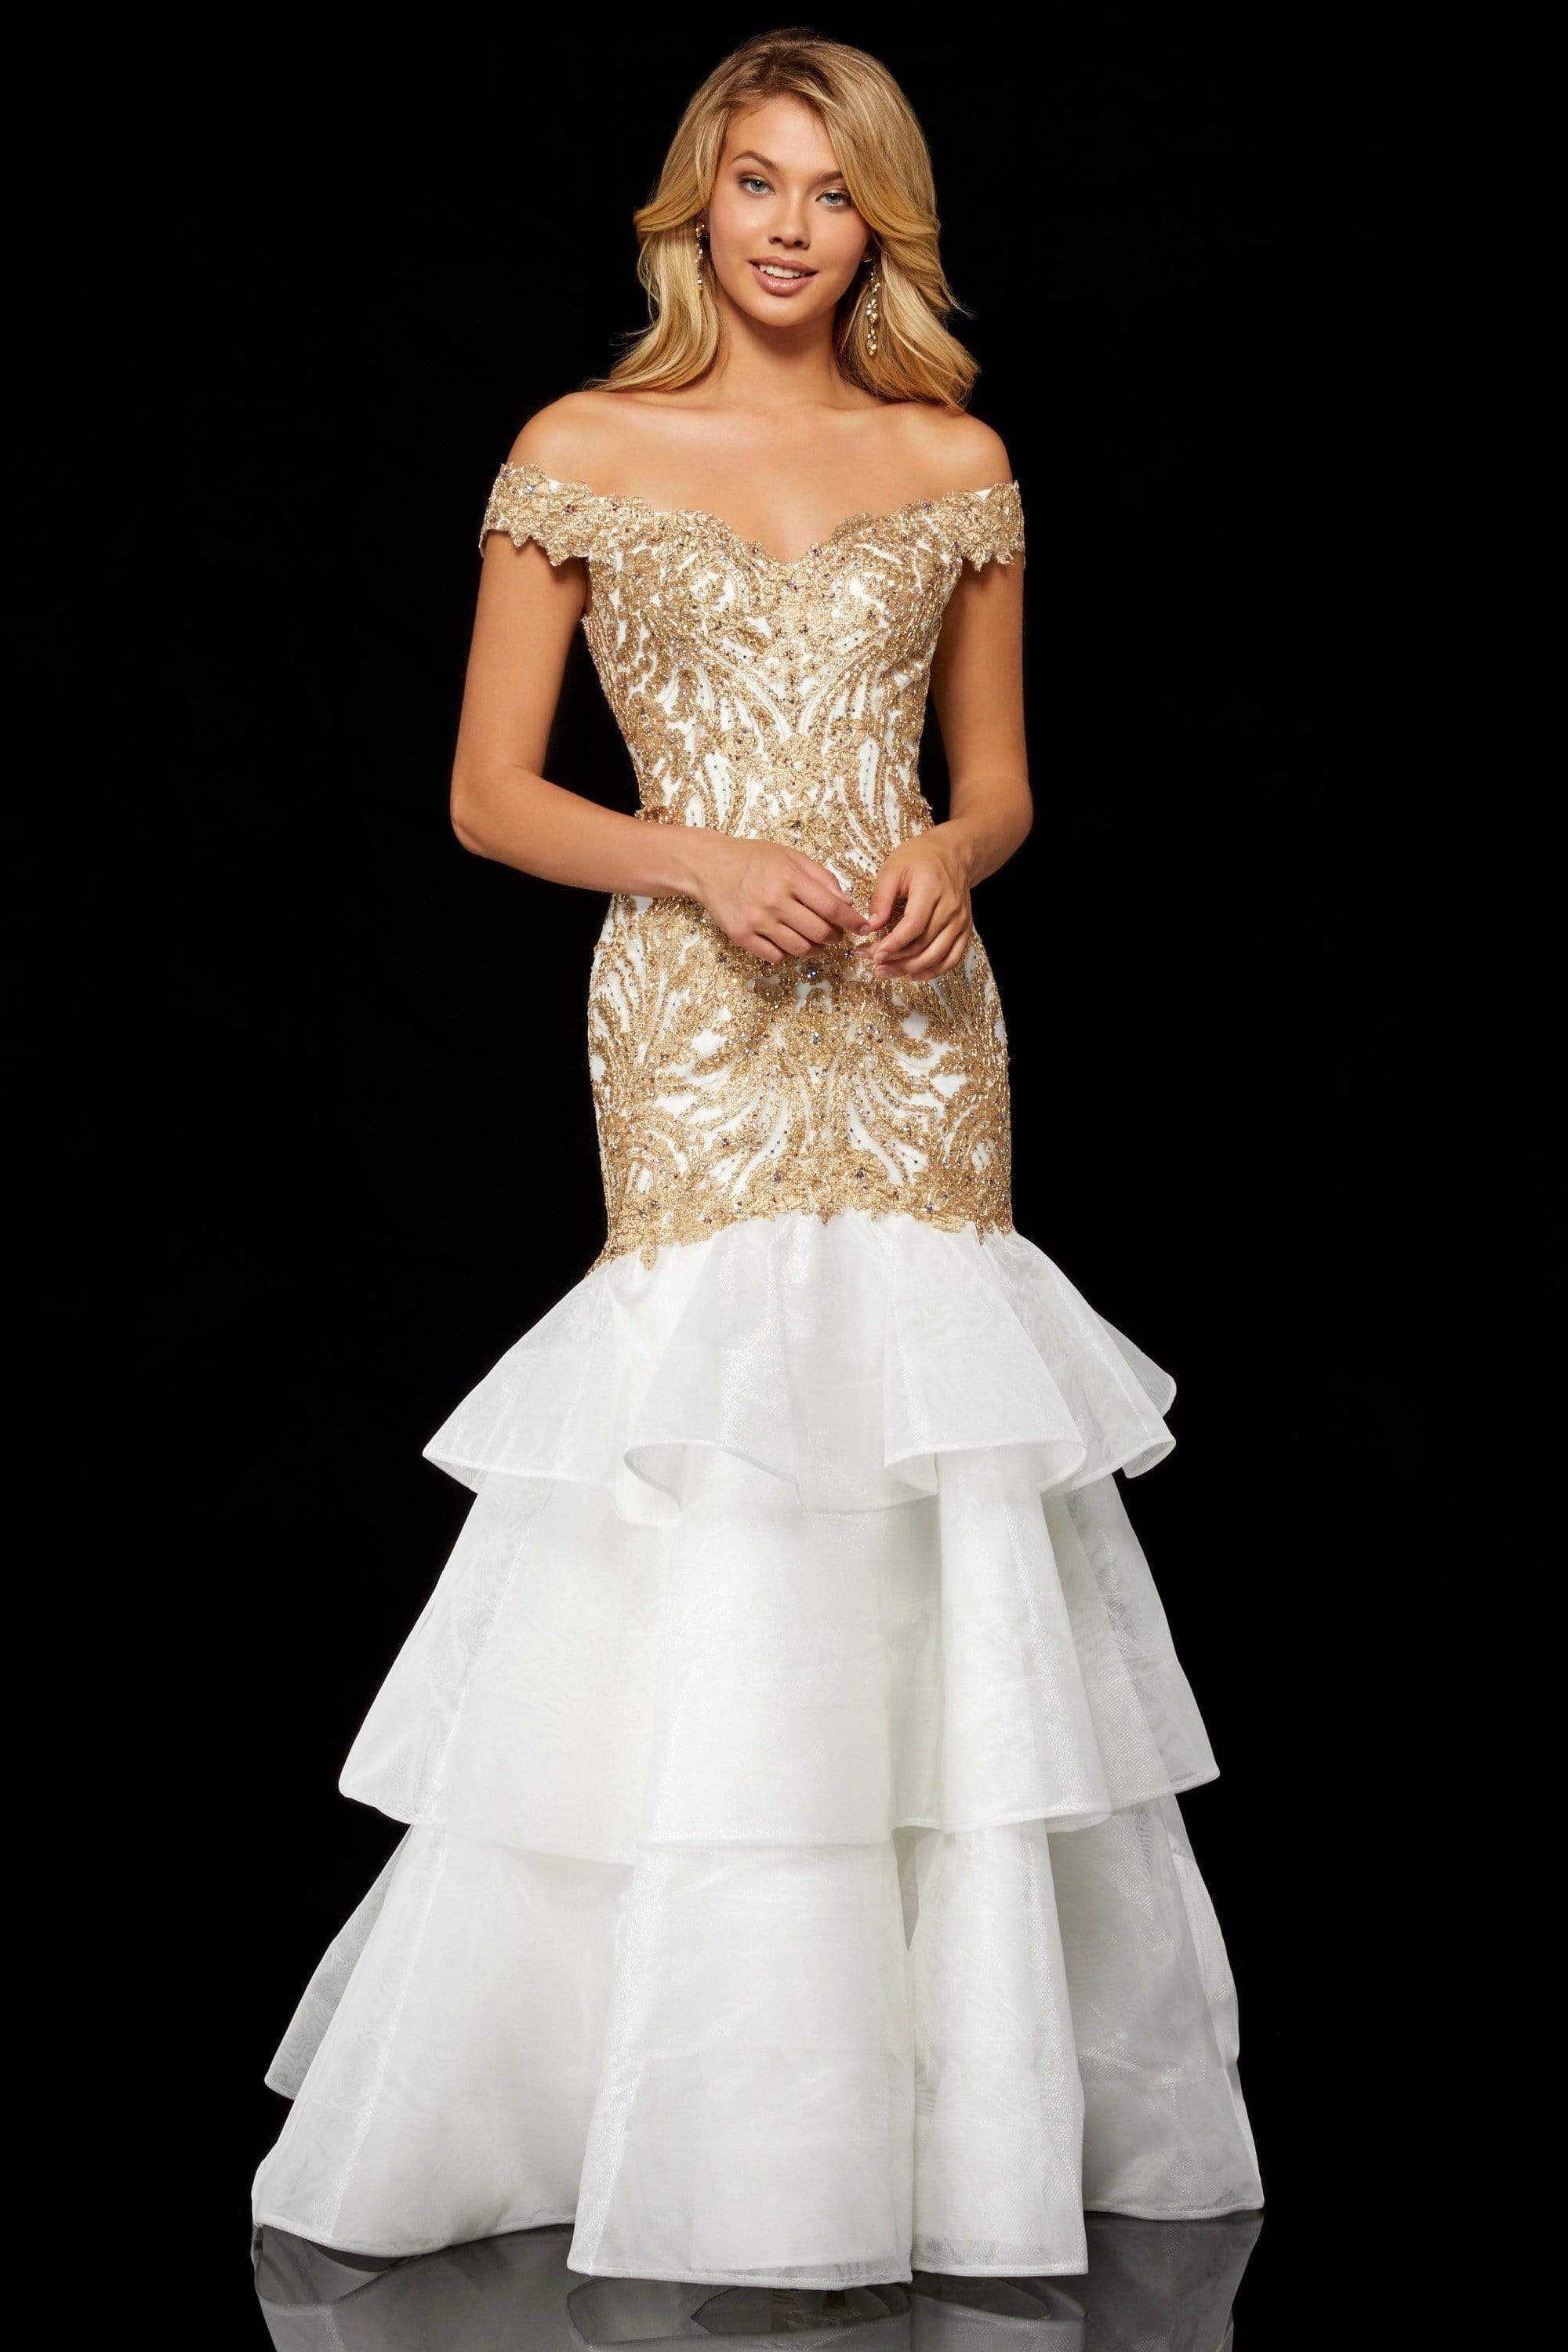 Sherri Hill, Sherri Hill -  Cap Sleeved Off Shoulder Tiered Mermaid Dress 52347 - 2 pc Ivory/Gold In Size 6 and 8 Available